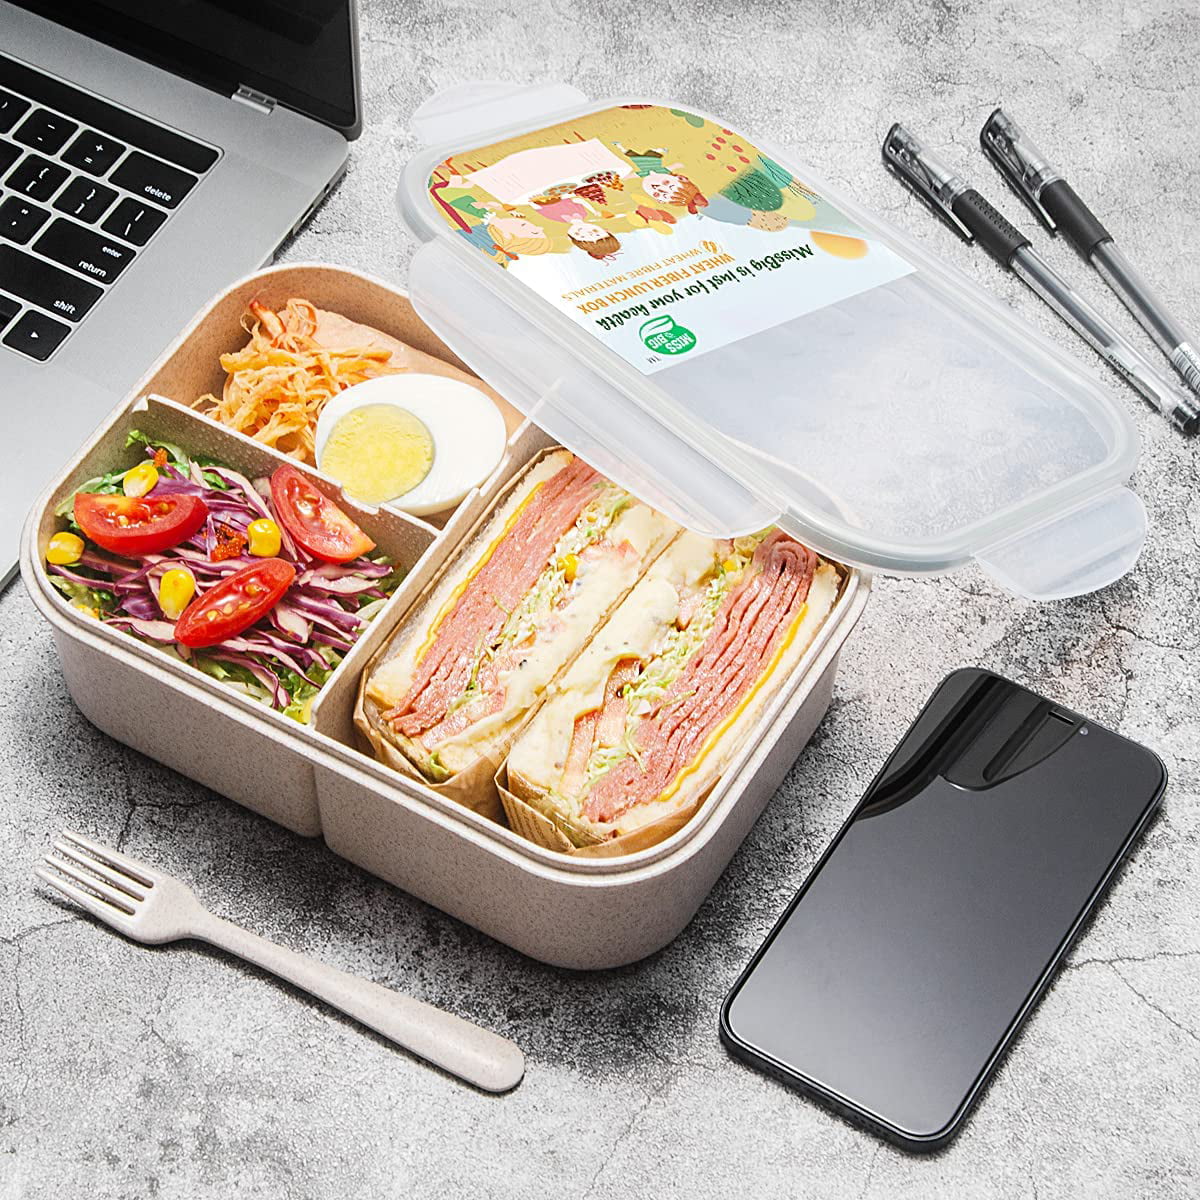 Feltree Home Essential Product Lunch Box Kids,Bento Box Adult